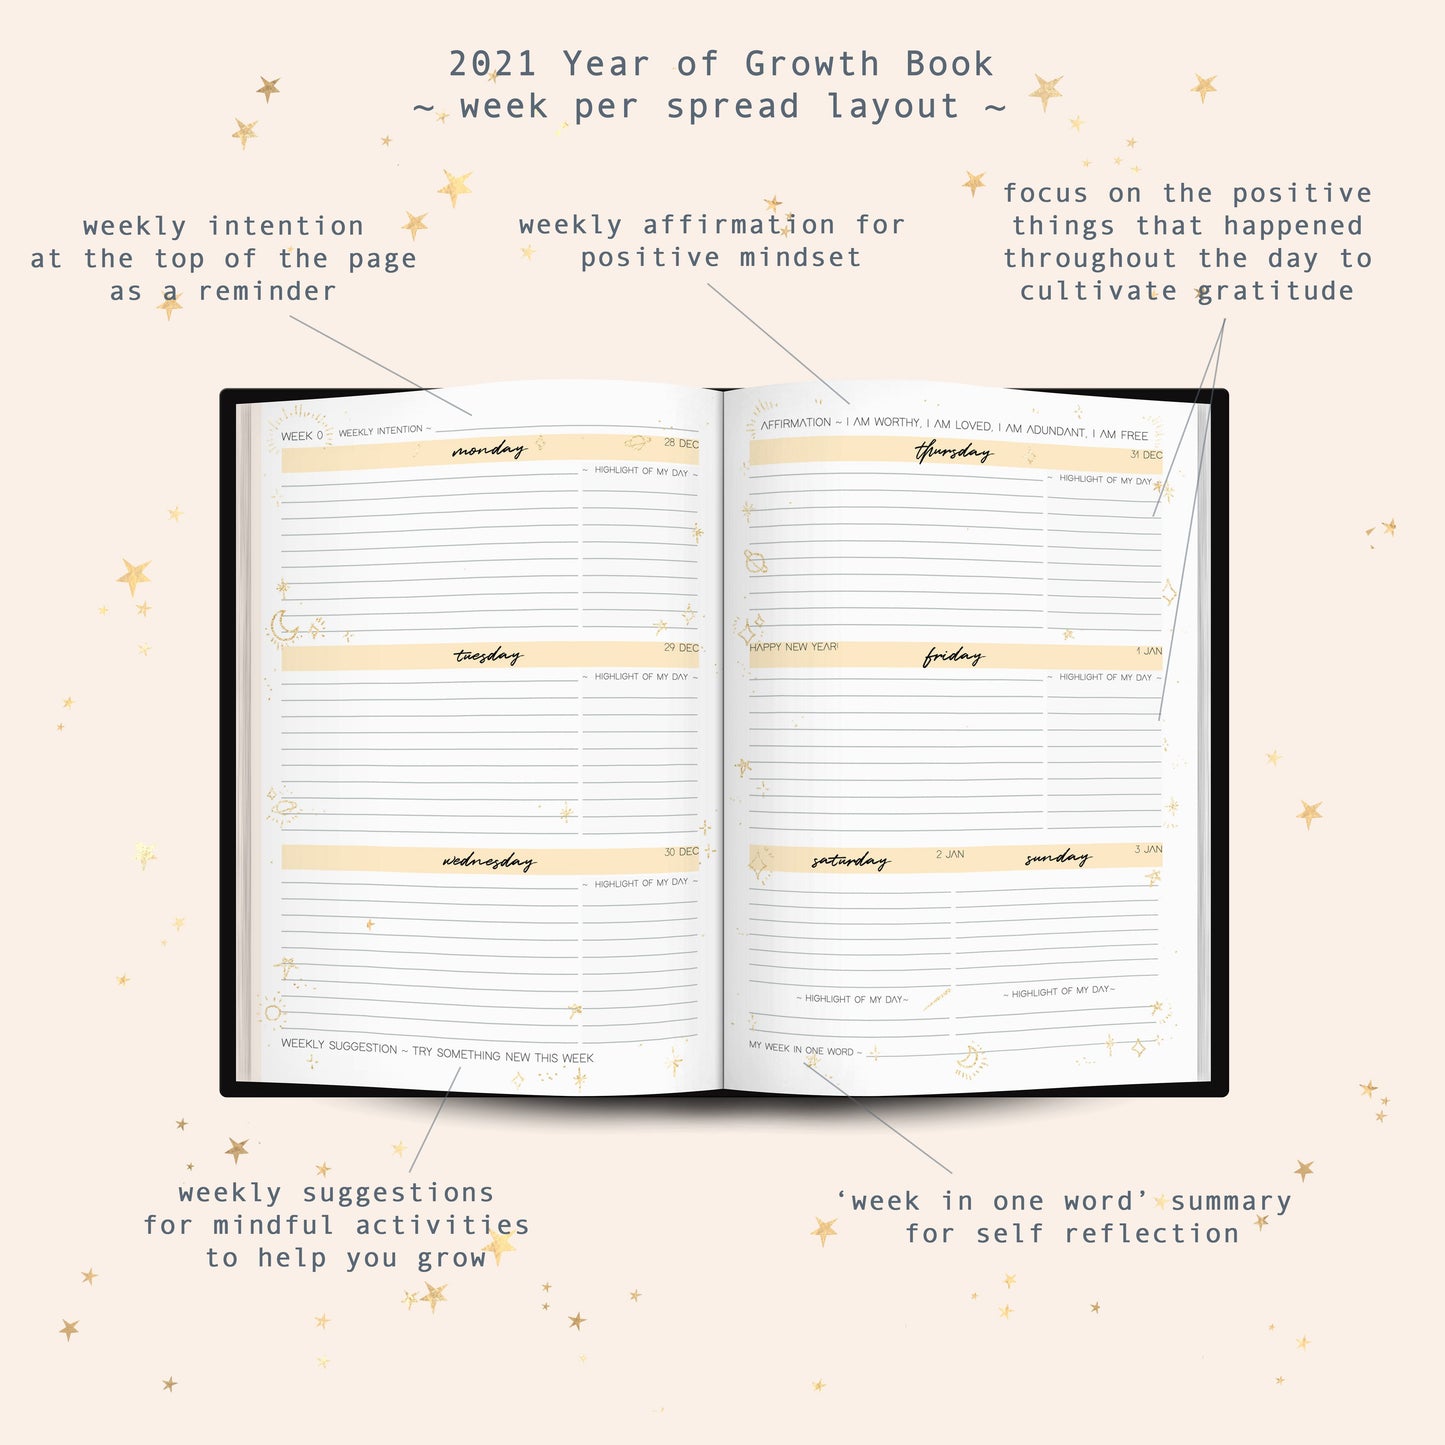 2021 Year of Growth Book